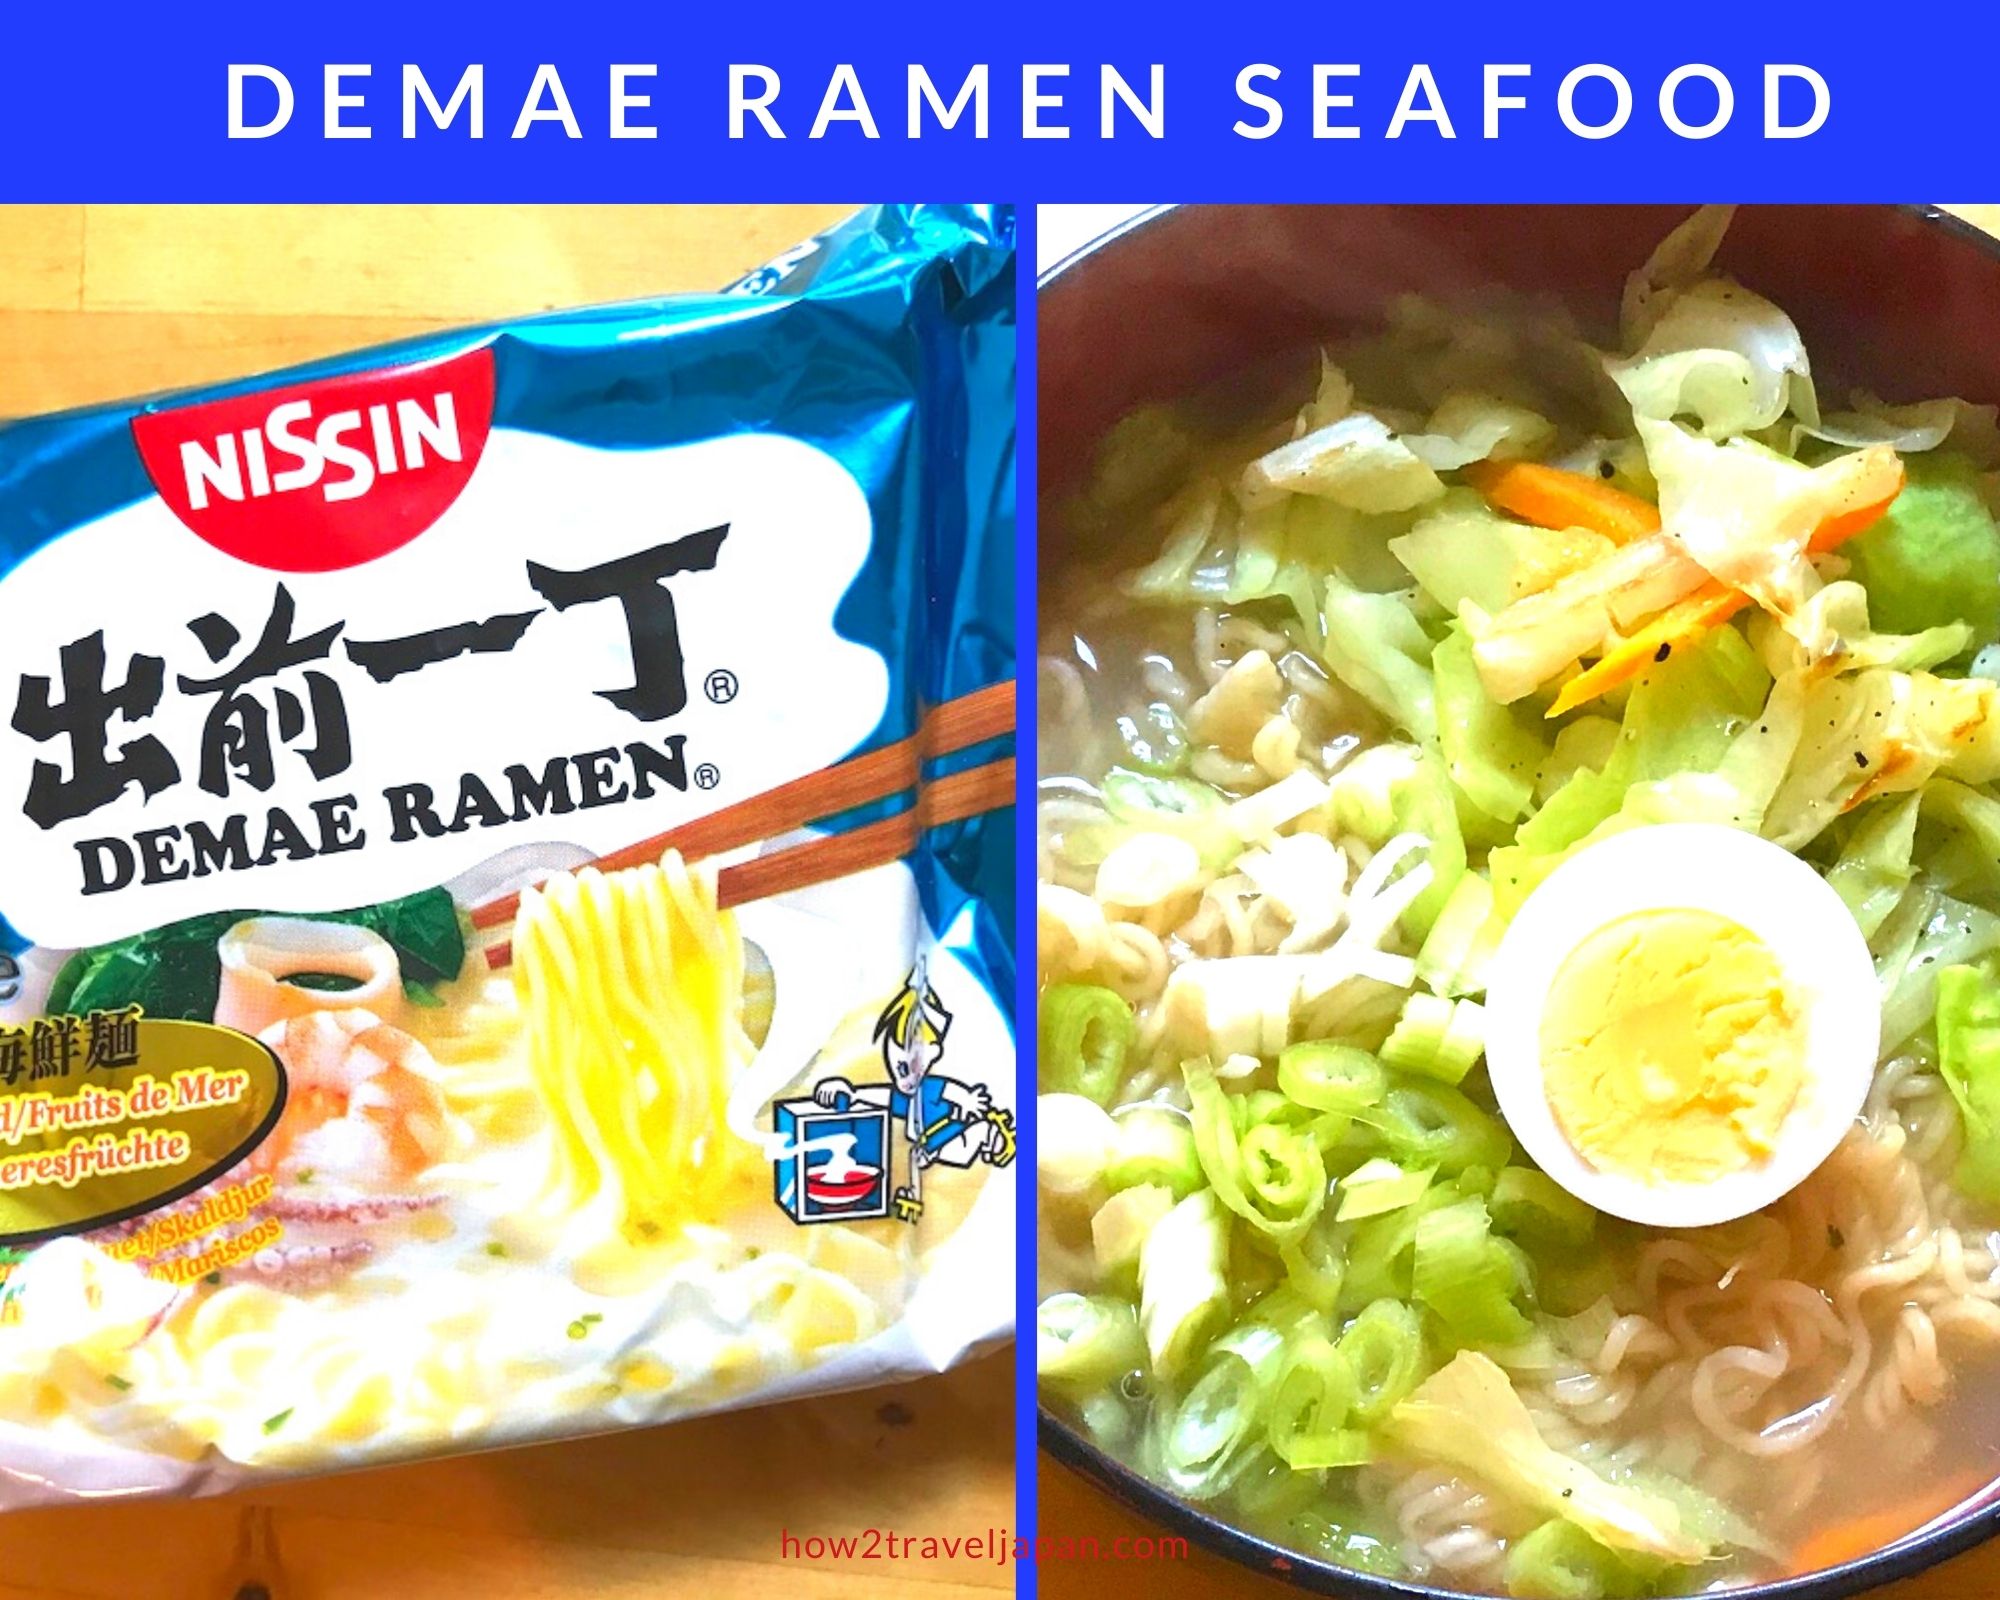 You are currently viewing Demae Ramen Seafood from Nissin